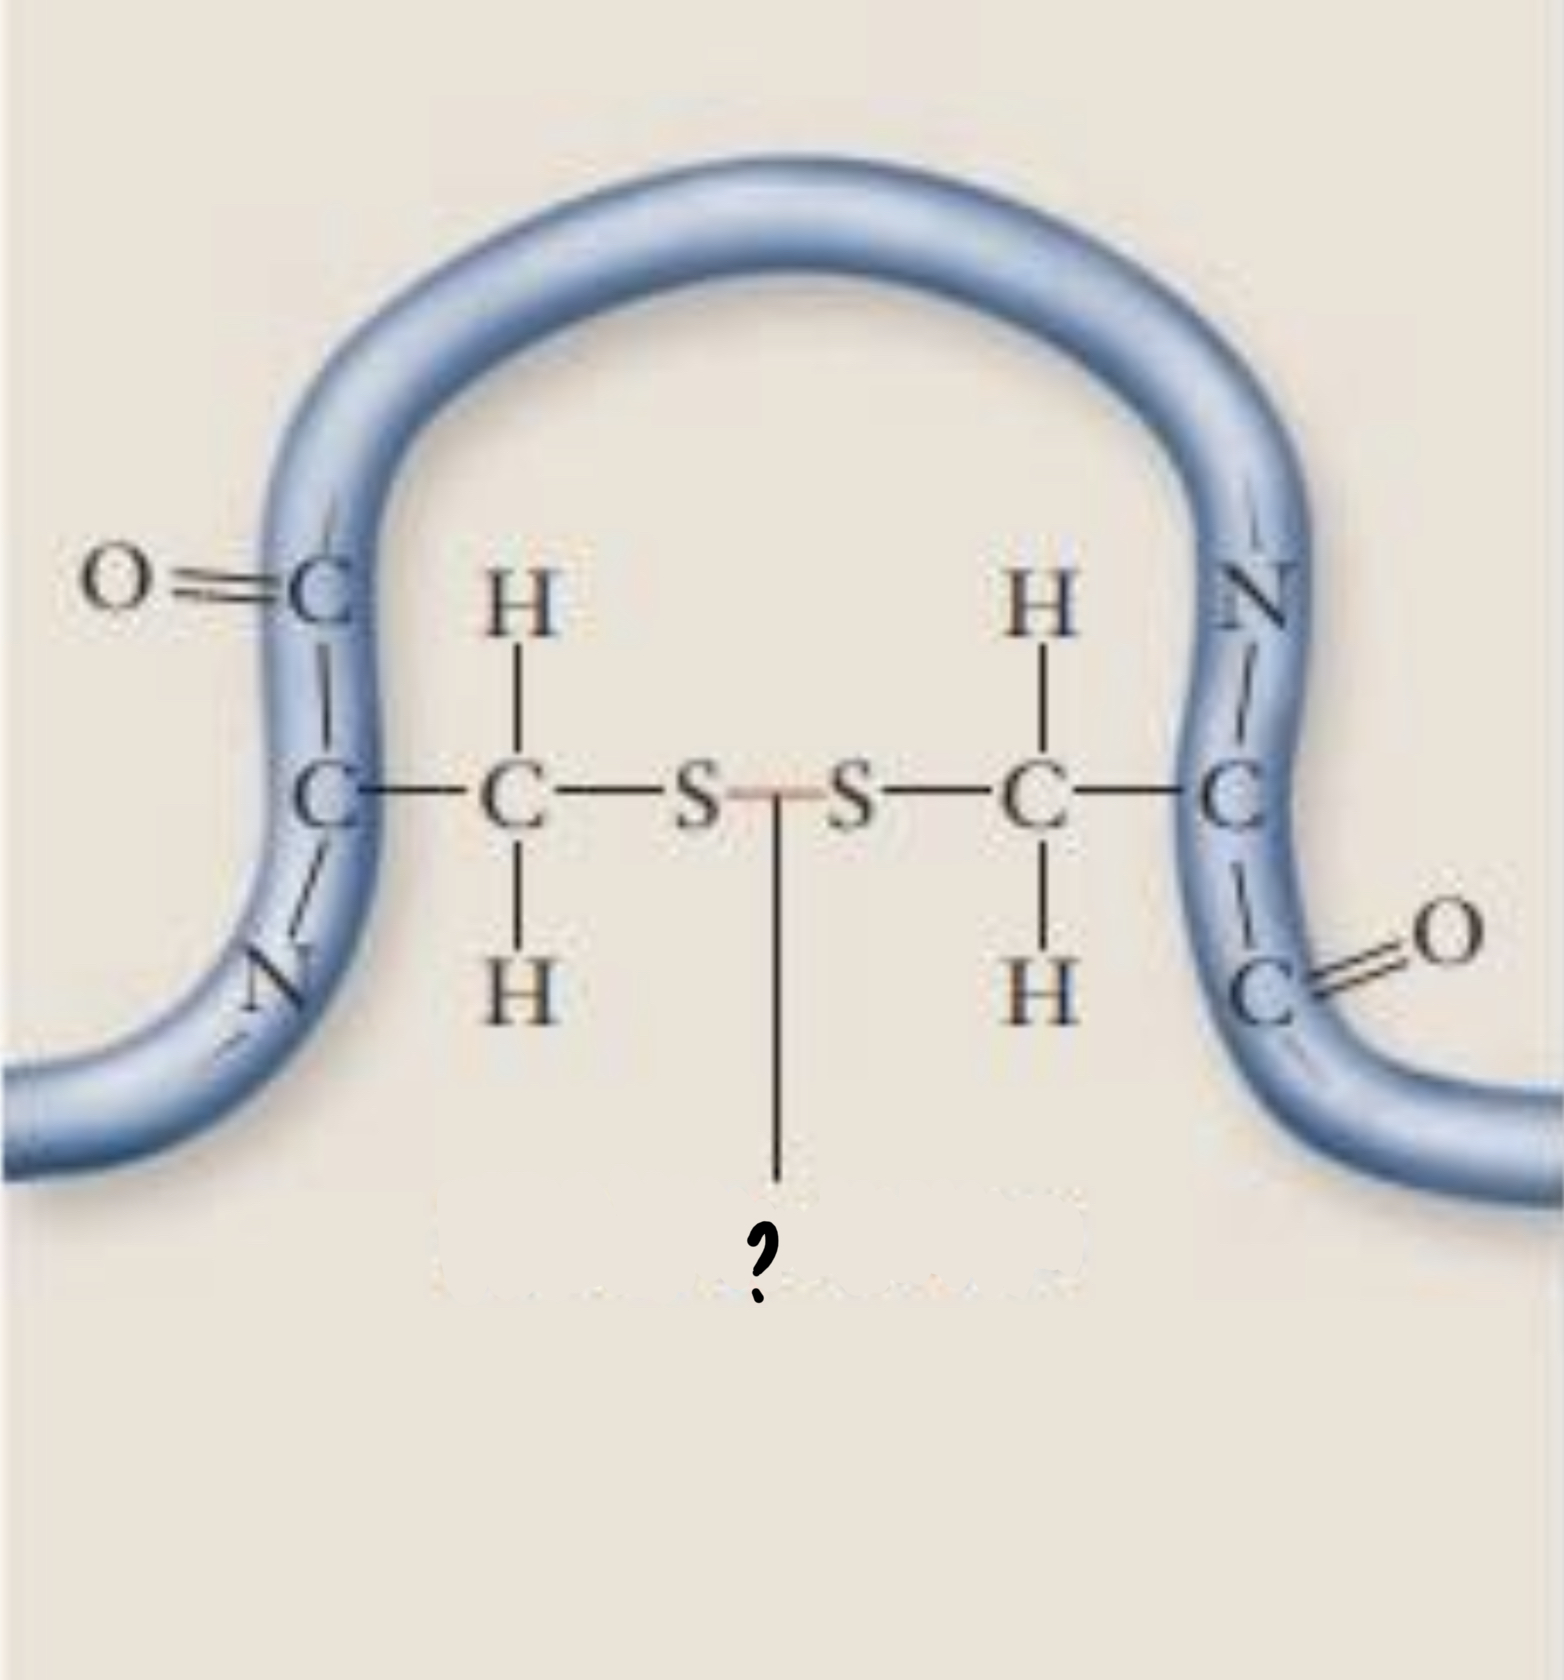 <ul><li><p>can form between 2 cysteine side chains</p></li><li><p>are strong covalent bonds that may reinforce the protein’s structure</p></li></ul>